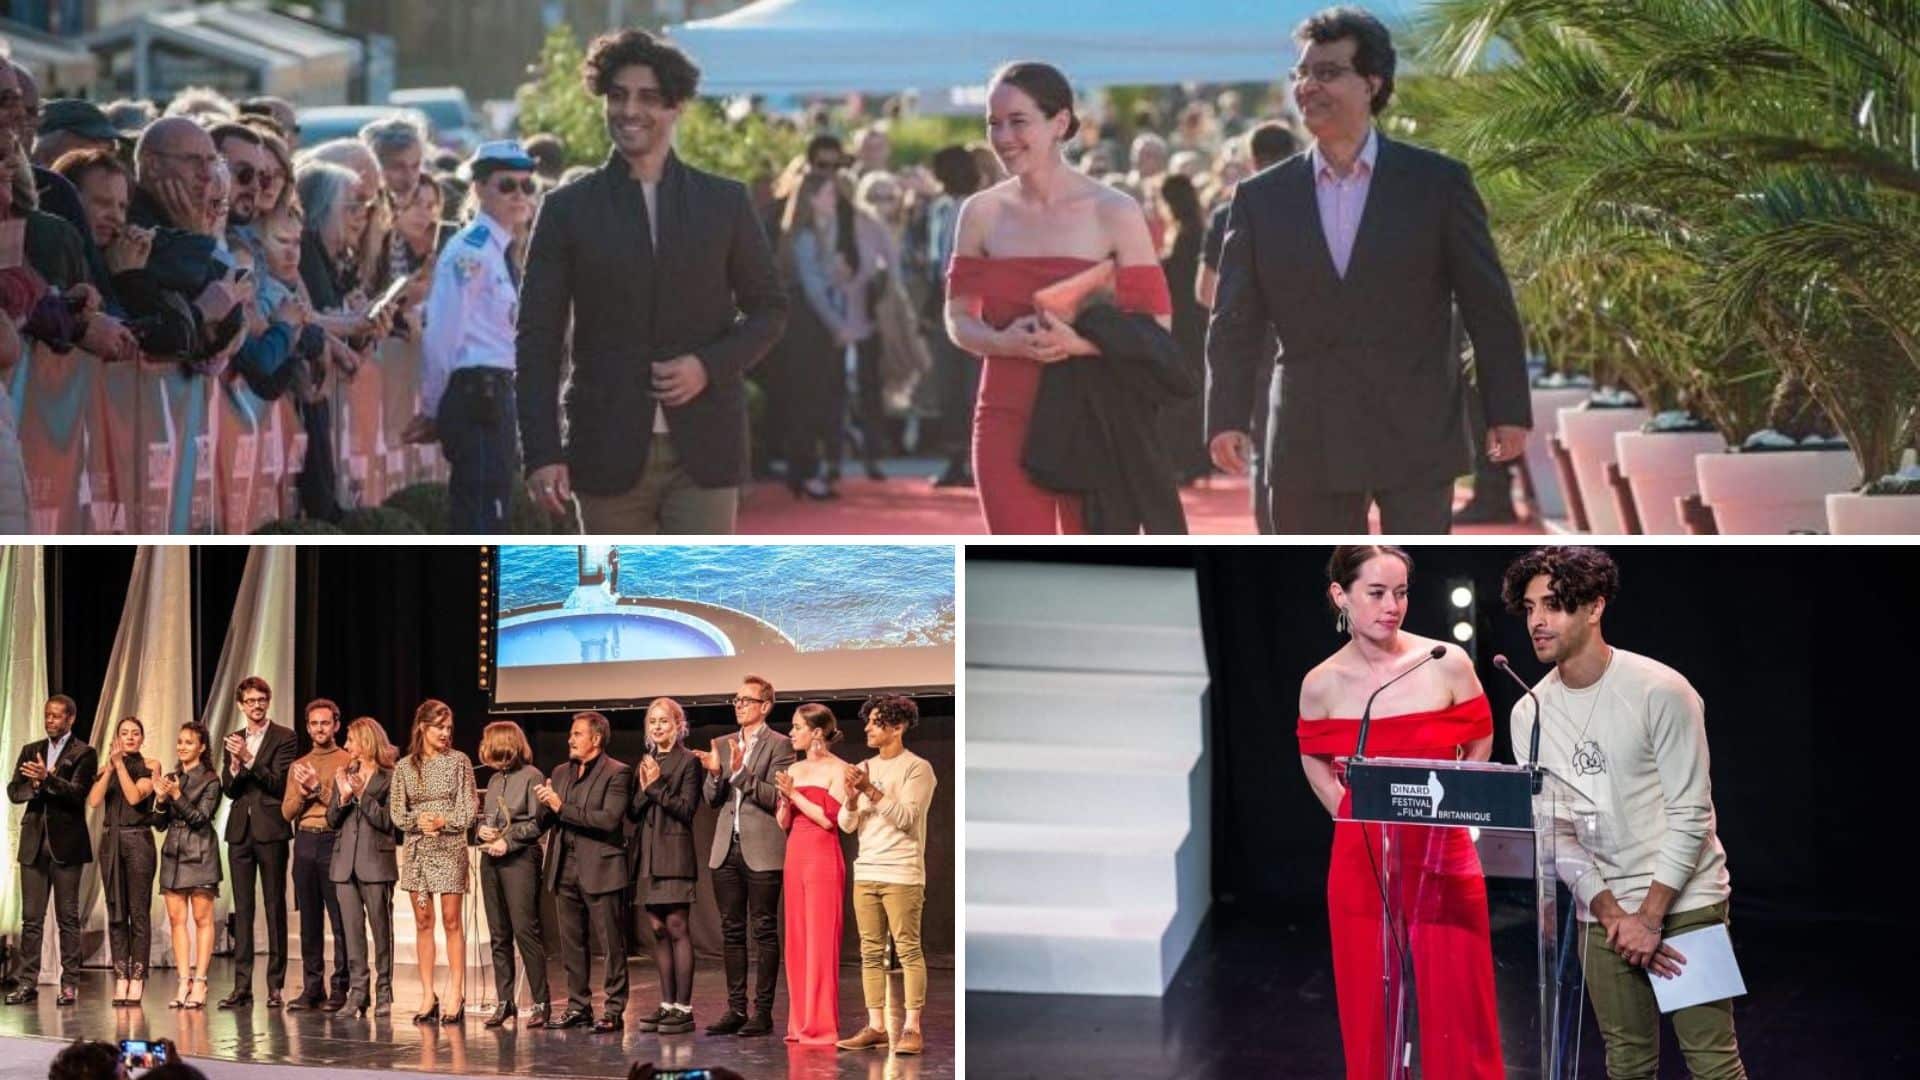 The Gallery premiered at he Dinard Film Festival. A collectionof images showing the cast/crew at the festival. Paul Raschid, Neville Raschid and Anna Popplewell walk the red carpet. Anna Popplewell and Paul Raschid give an award. A crowd of people in suits and dresses stand on stage.